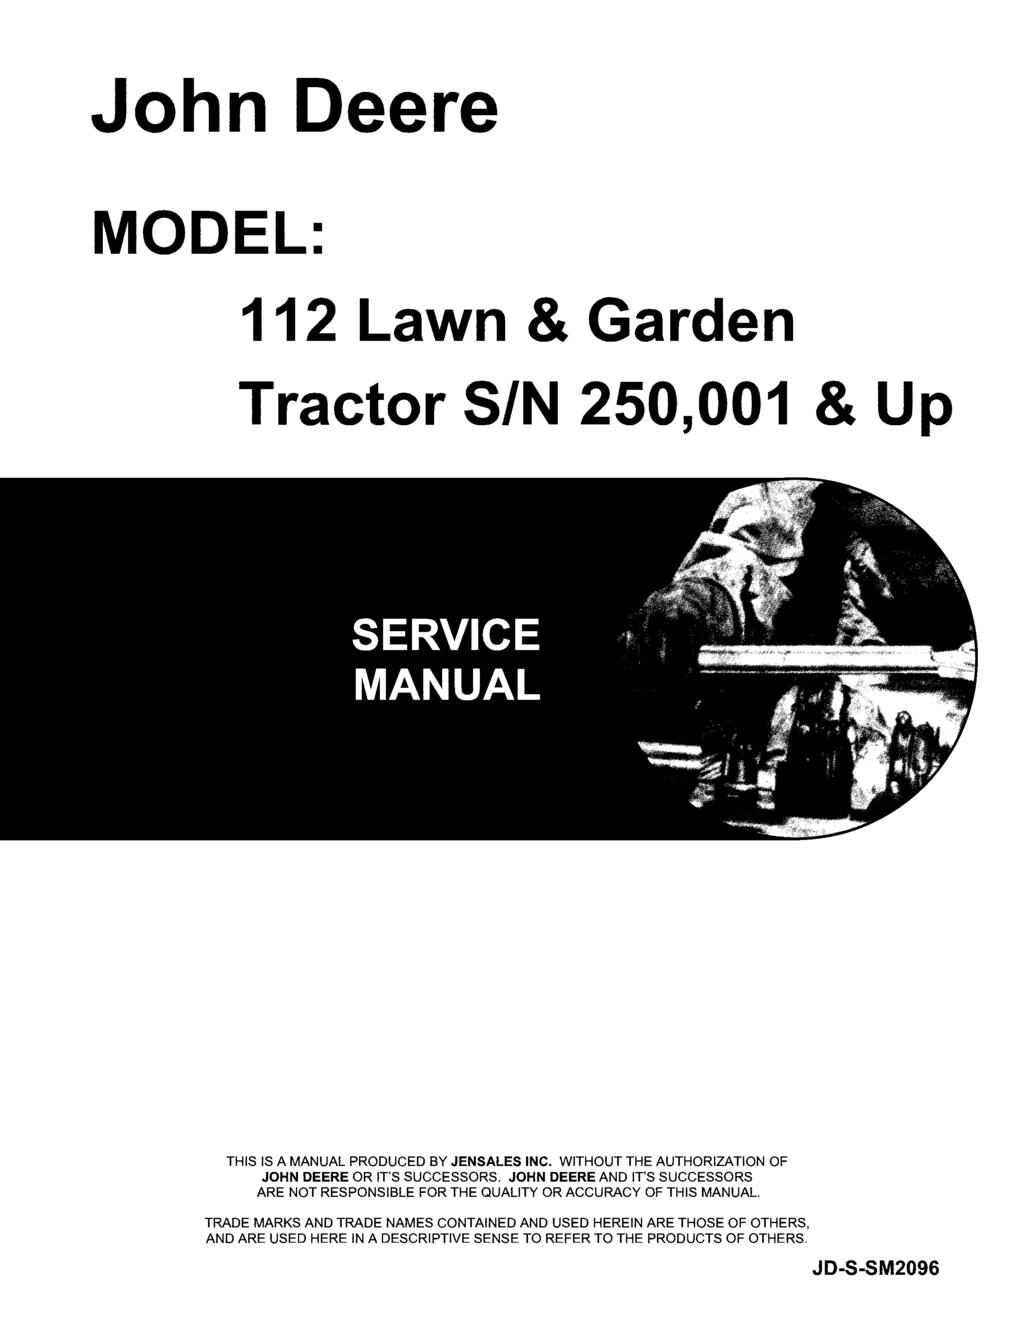 John Deere MODEL: 112 Lawn & Garden Tractor SIN 250,001 & Up THIS IS A MANUAL PRODUCED BY JENSALES INC. WITHOUT THE AUTHORIZATION OF JOHN DEERE OR IT'S SUCCESSORS.